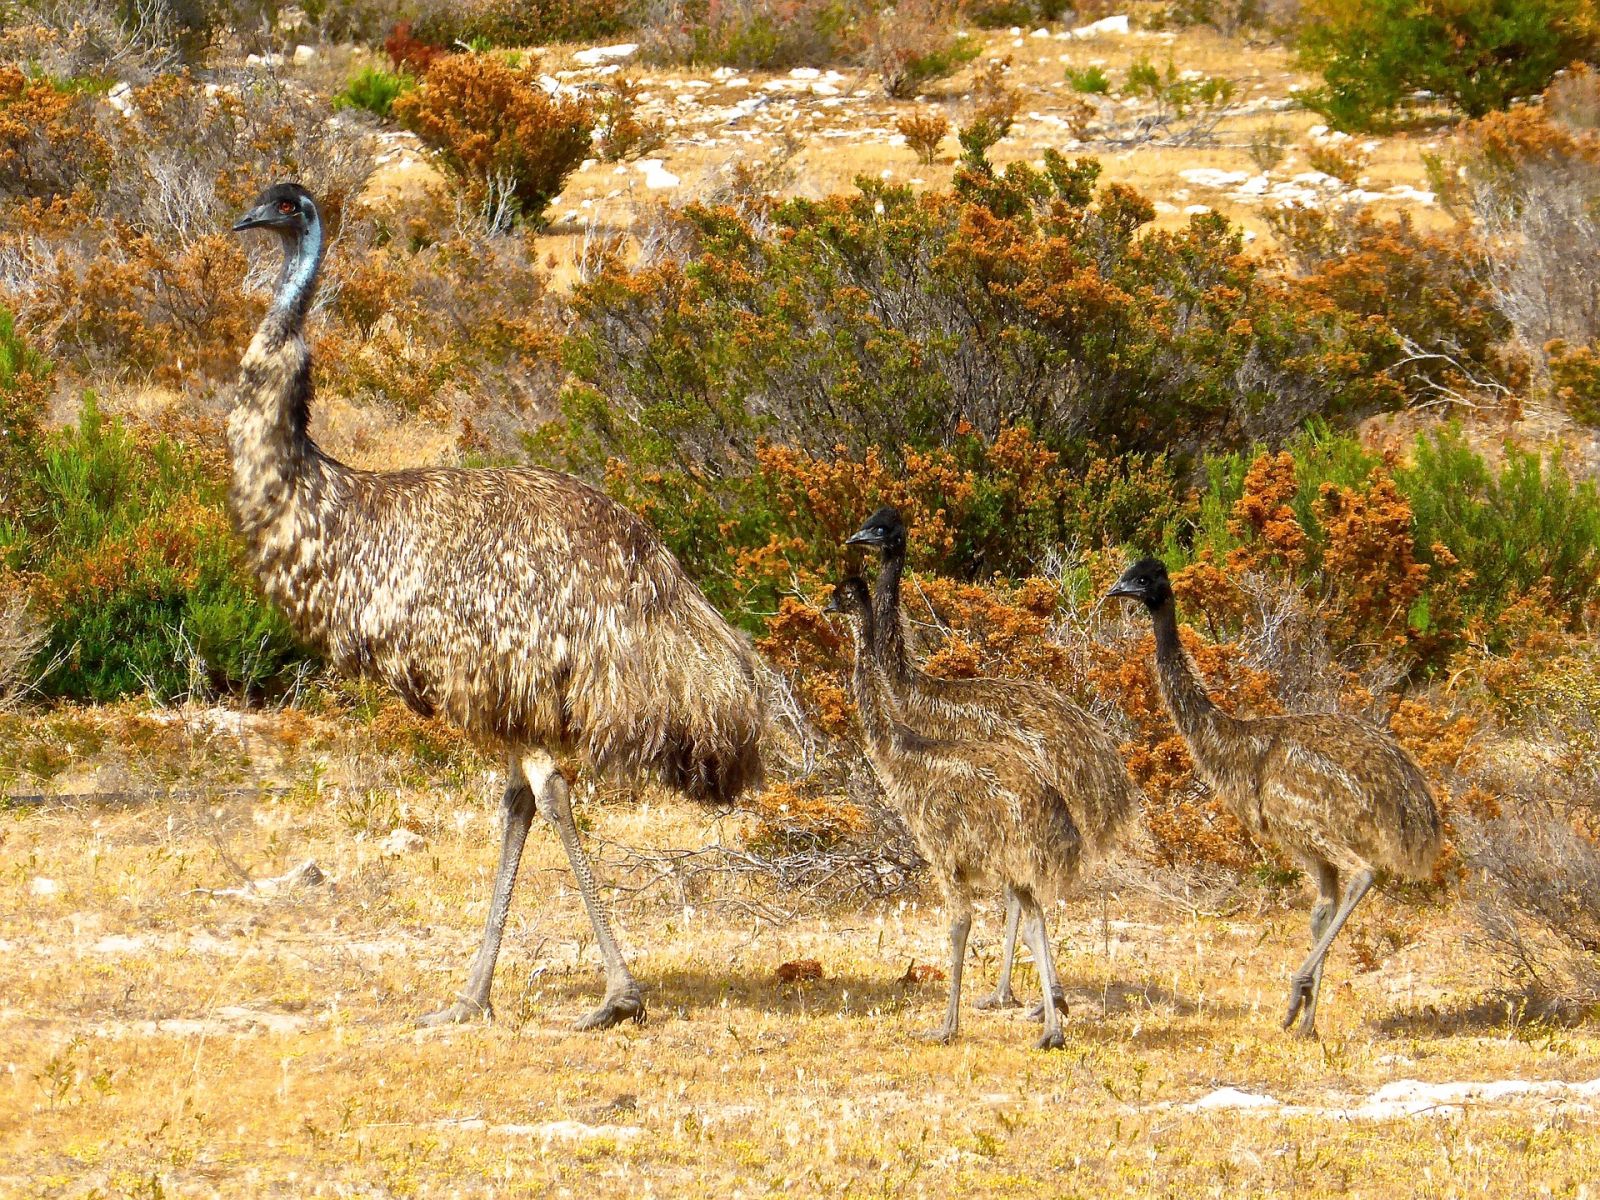 Where would an Emu get refuge in a bushfire? The Pub of course!